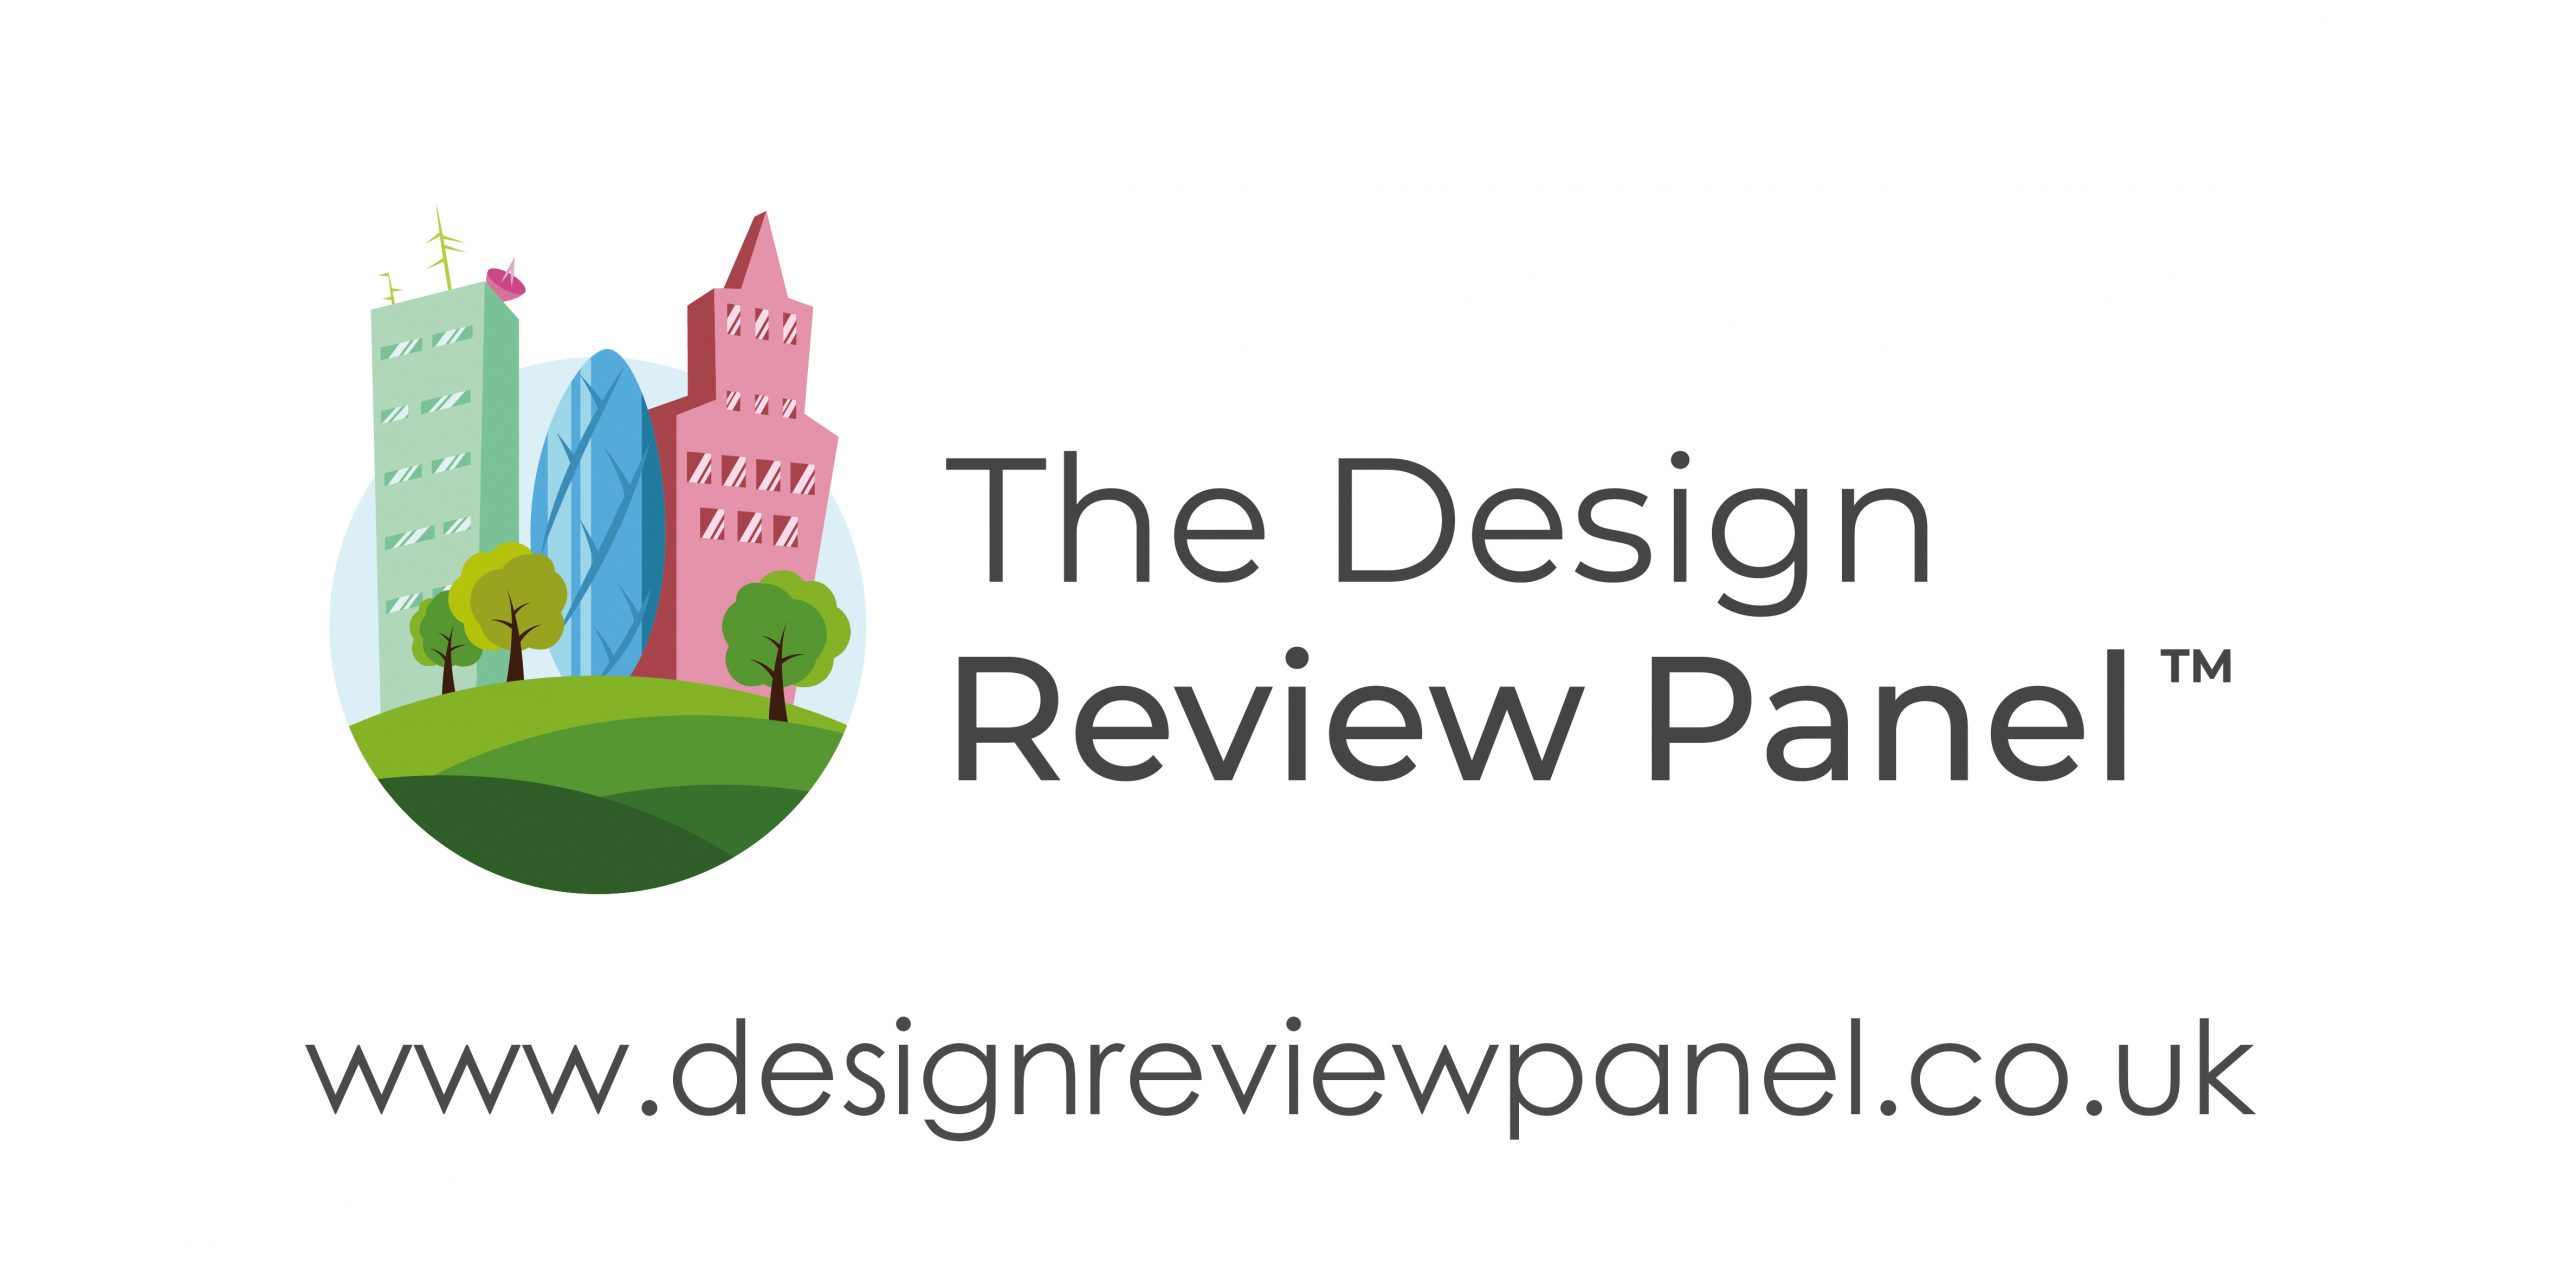 The Design Review Panel